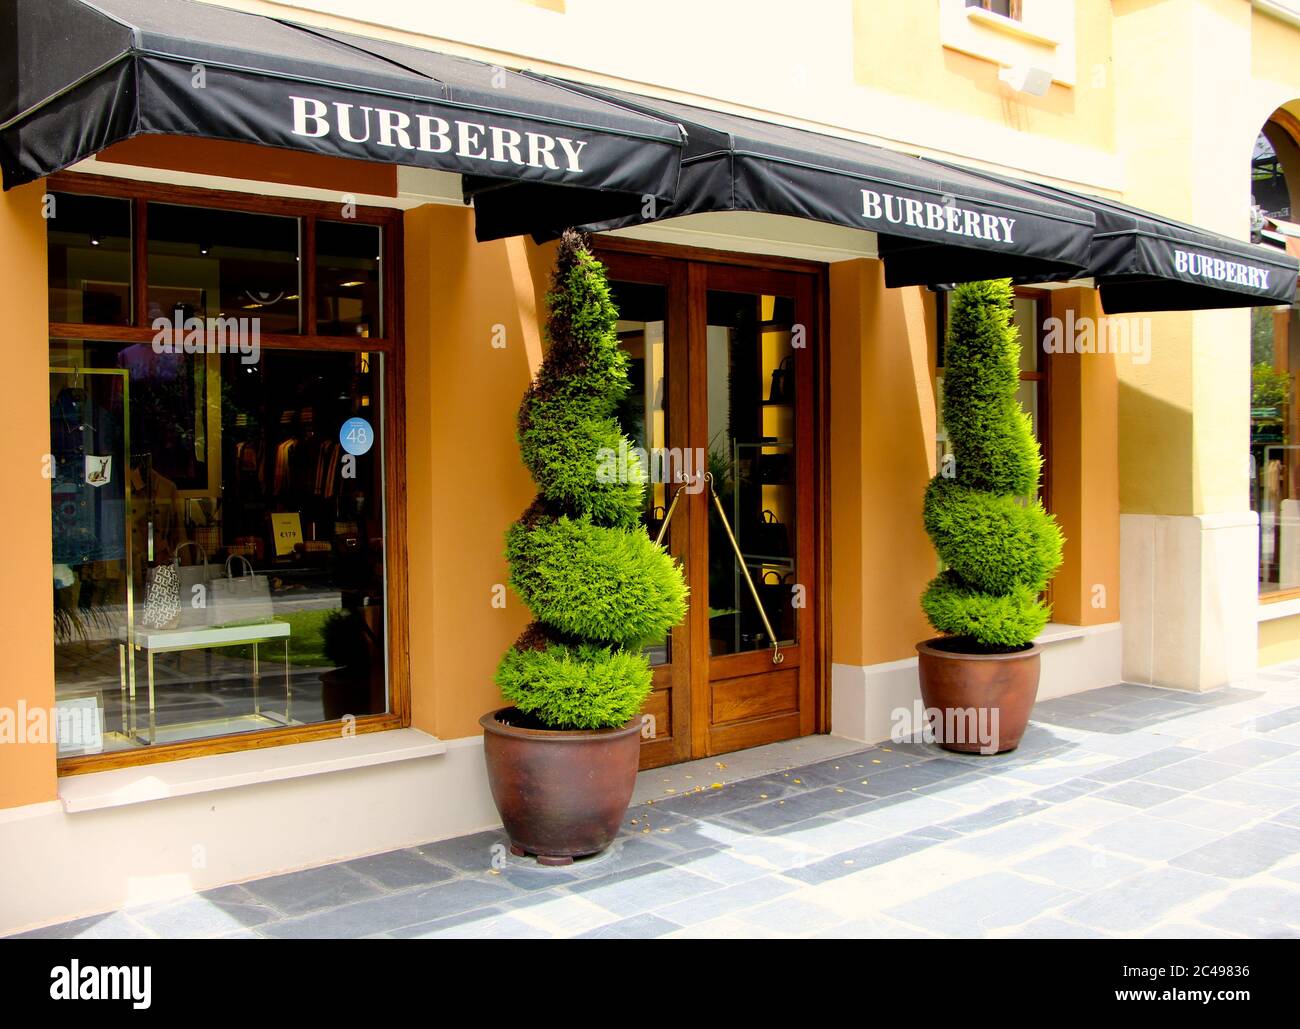 burberry istanbul outlet